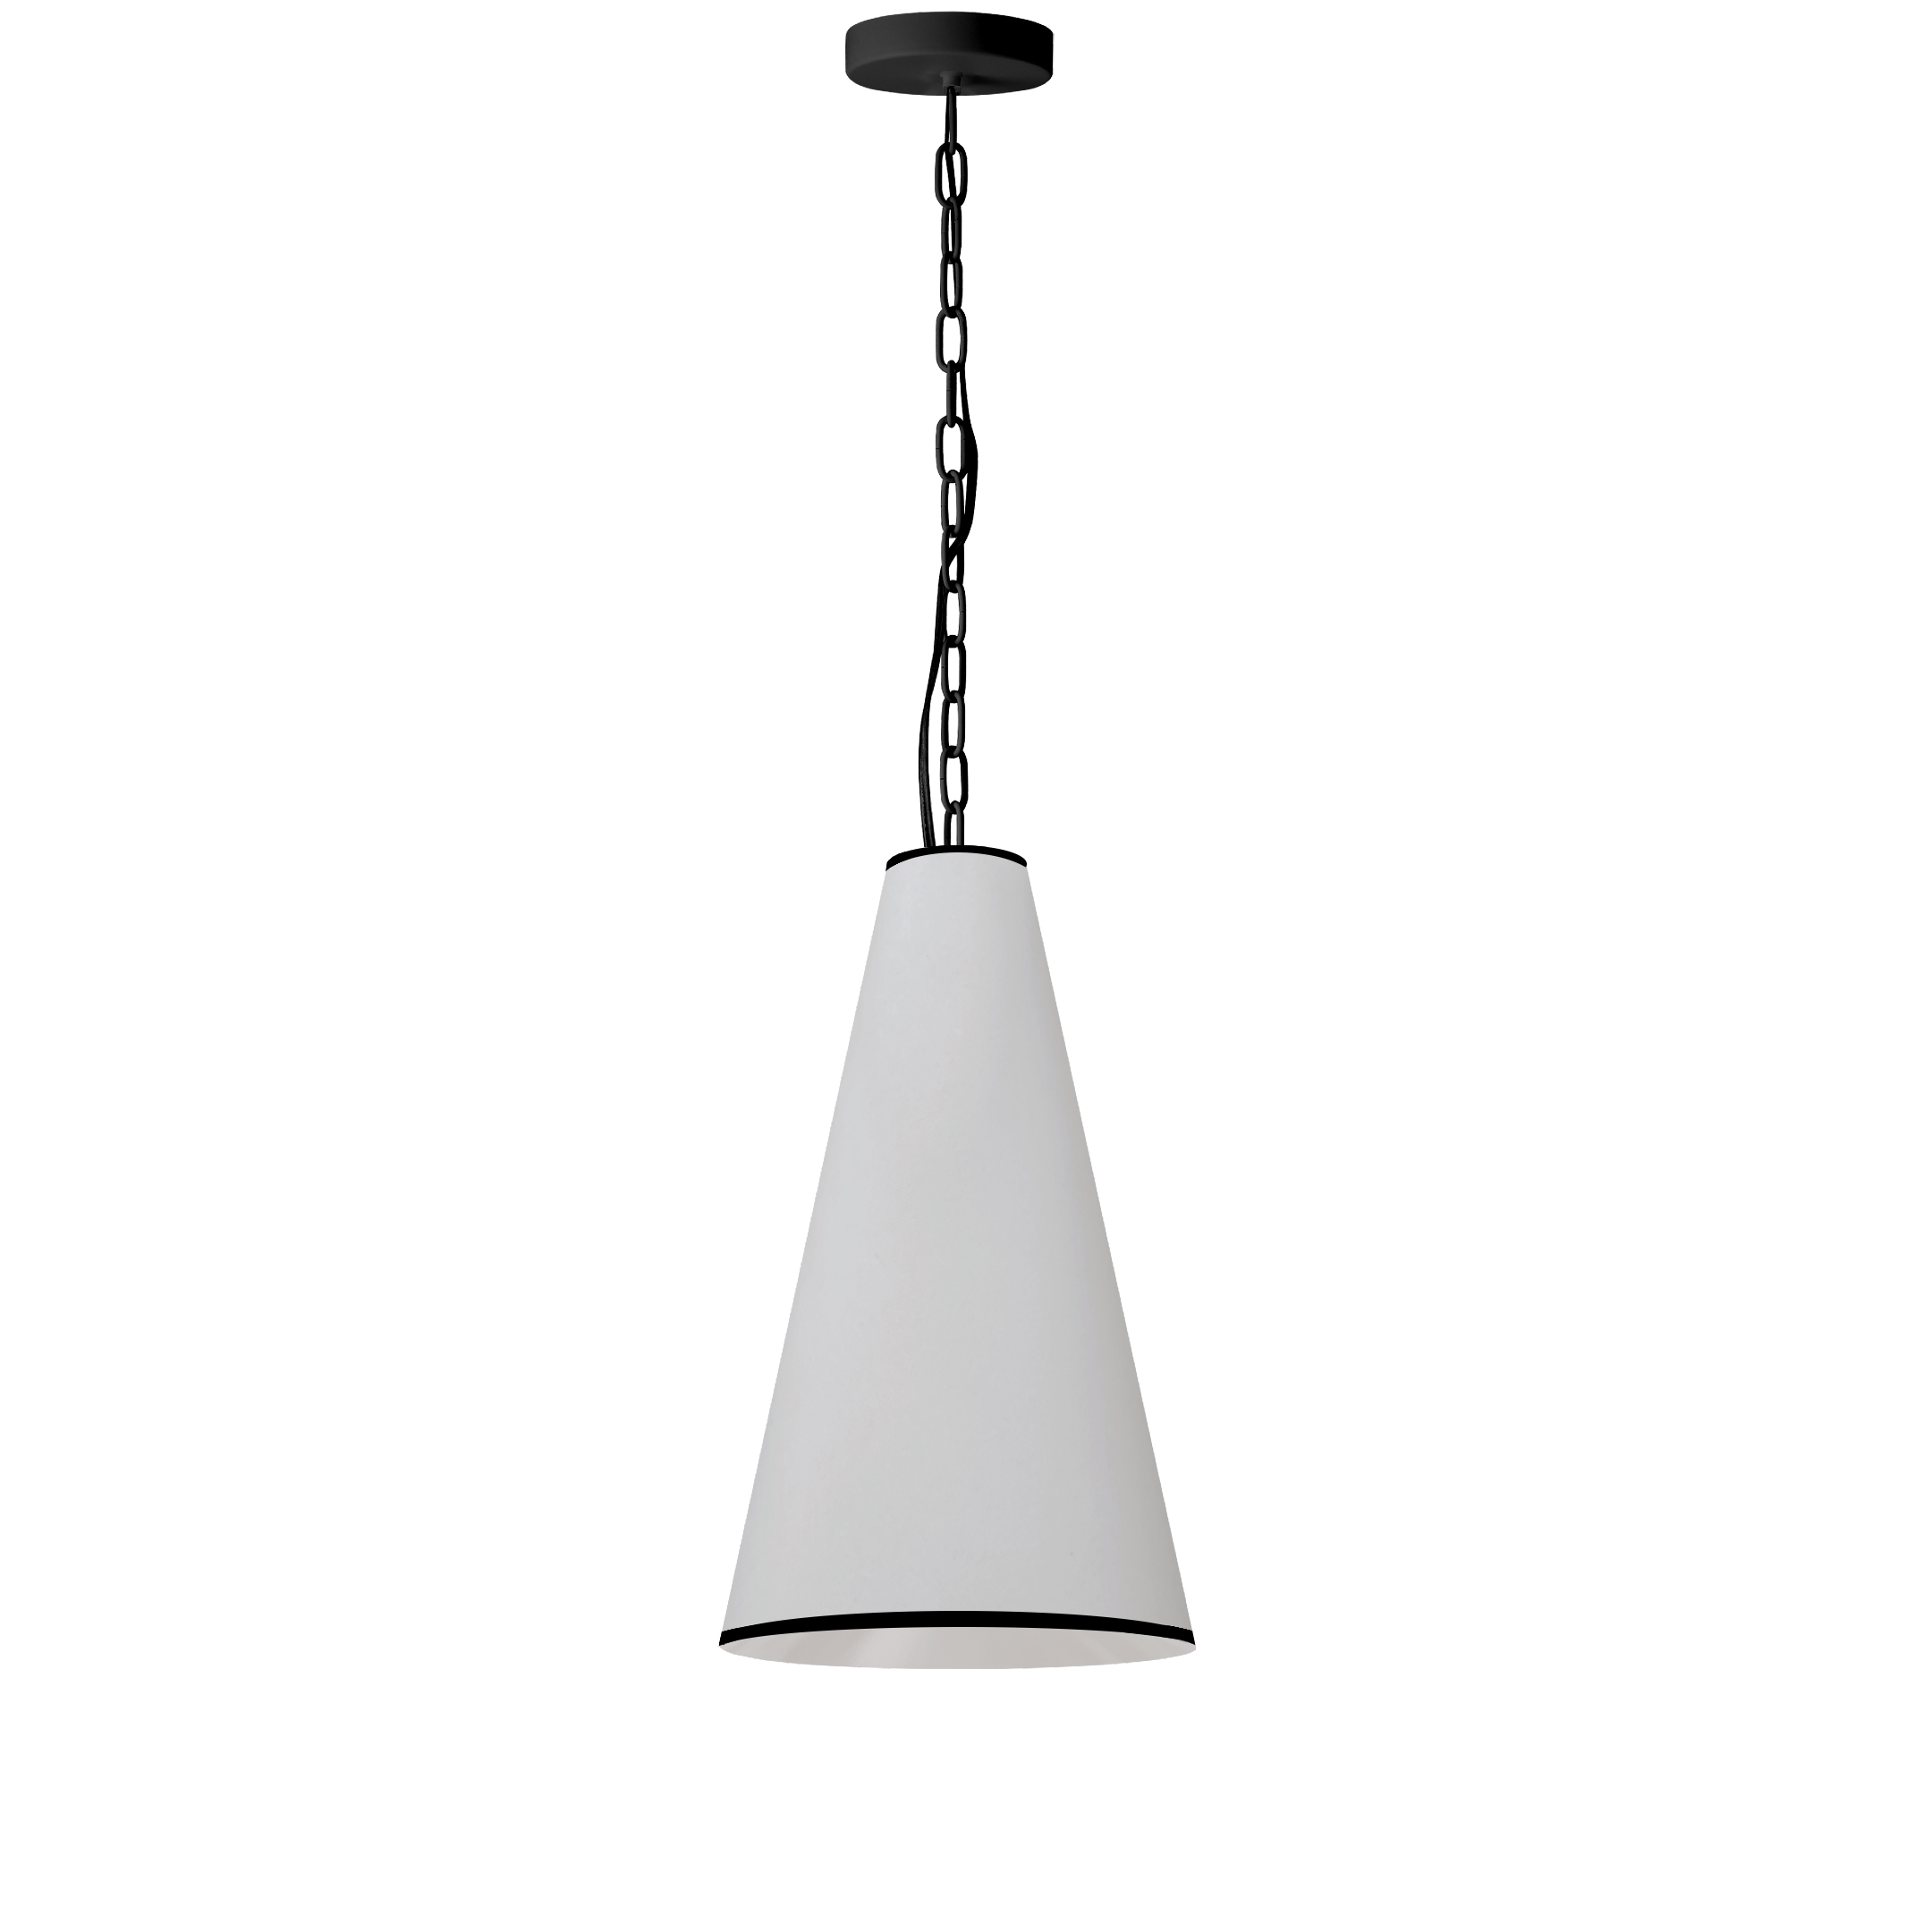 The Prym family of lighting makes a statement in refined style. With its sophisticated profile and fashionable sense of detail, it offers a versatile look incorporating elements of mid-century, modern and contemporary design. The chain drop leads to a metal frame in matte black, which extends as a trim to the fabric shade. The drum style shade features a tall tapered construction that gives it a noticeable presence in a room. Available with your choice of fabric, Prym lighting adds a focal point to your kitchen, living or dining rooms.